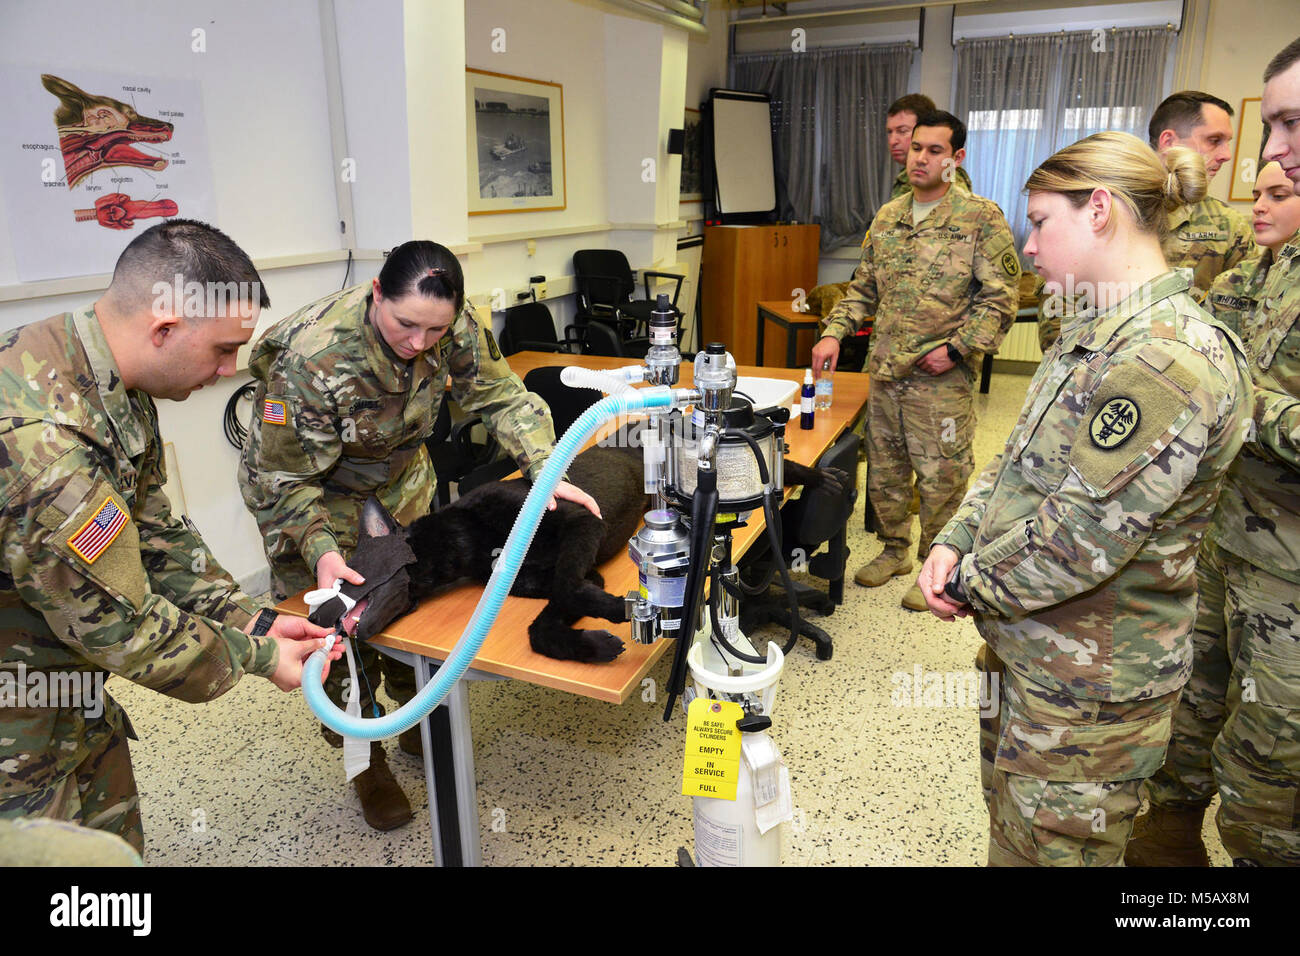 U.S. Army Sgt. Manuel Ivan Cervantes, animal care NCO, USARMY MEDCOM PH-E (left) and Sgt. Holly J. Schmidt assigned 64th Medical Detachment (USS) Baumholder Germany( center) , use Hero' the dummy training dog, to demonstrate how to properly intubate a patient who is undergoing general anesthesia during training Public Health Activity Italy Animal Care Specialists at Caserma Pluto, Longare, Vicenza, 12 Feb. 2018. Once the animal is intubated their heart and respiratory rate, blood oxygenation rate and carbon dioxide levels are monitored to make sure they're not too excessively sedated during su Stock Photo